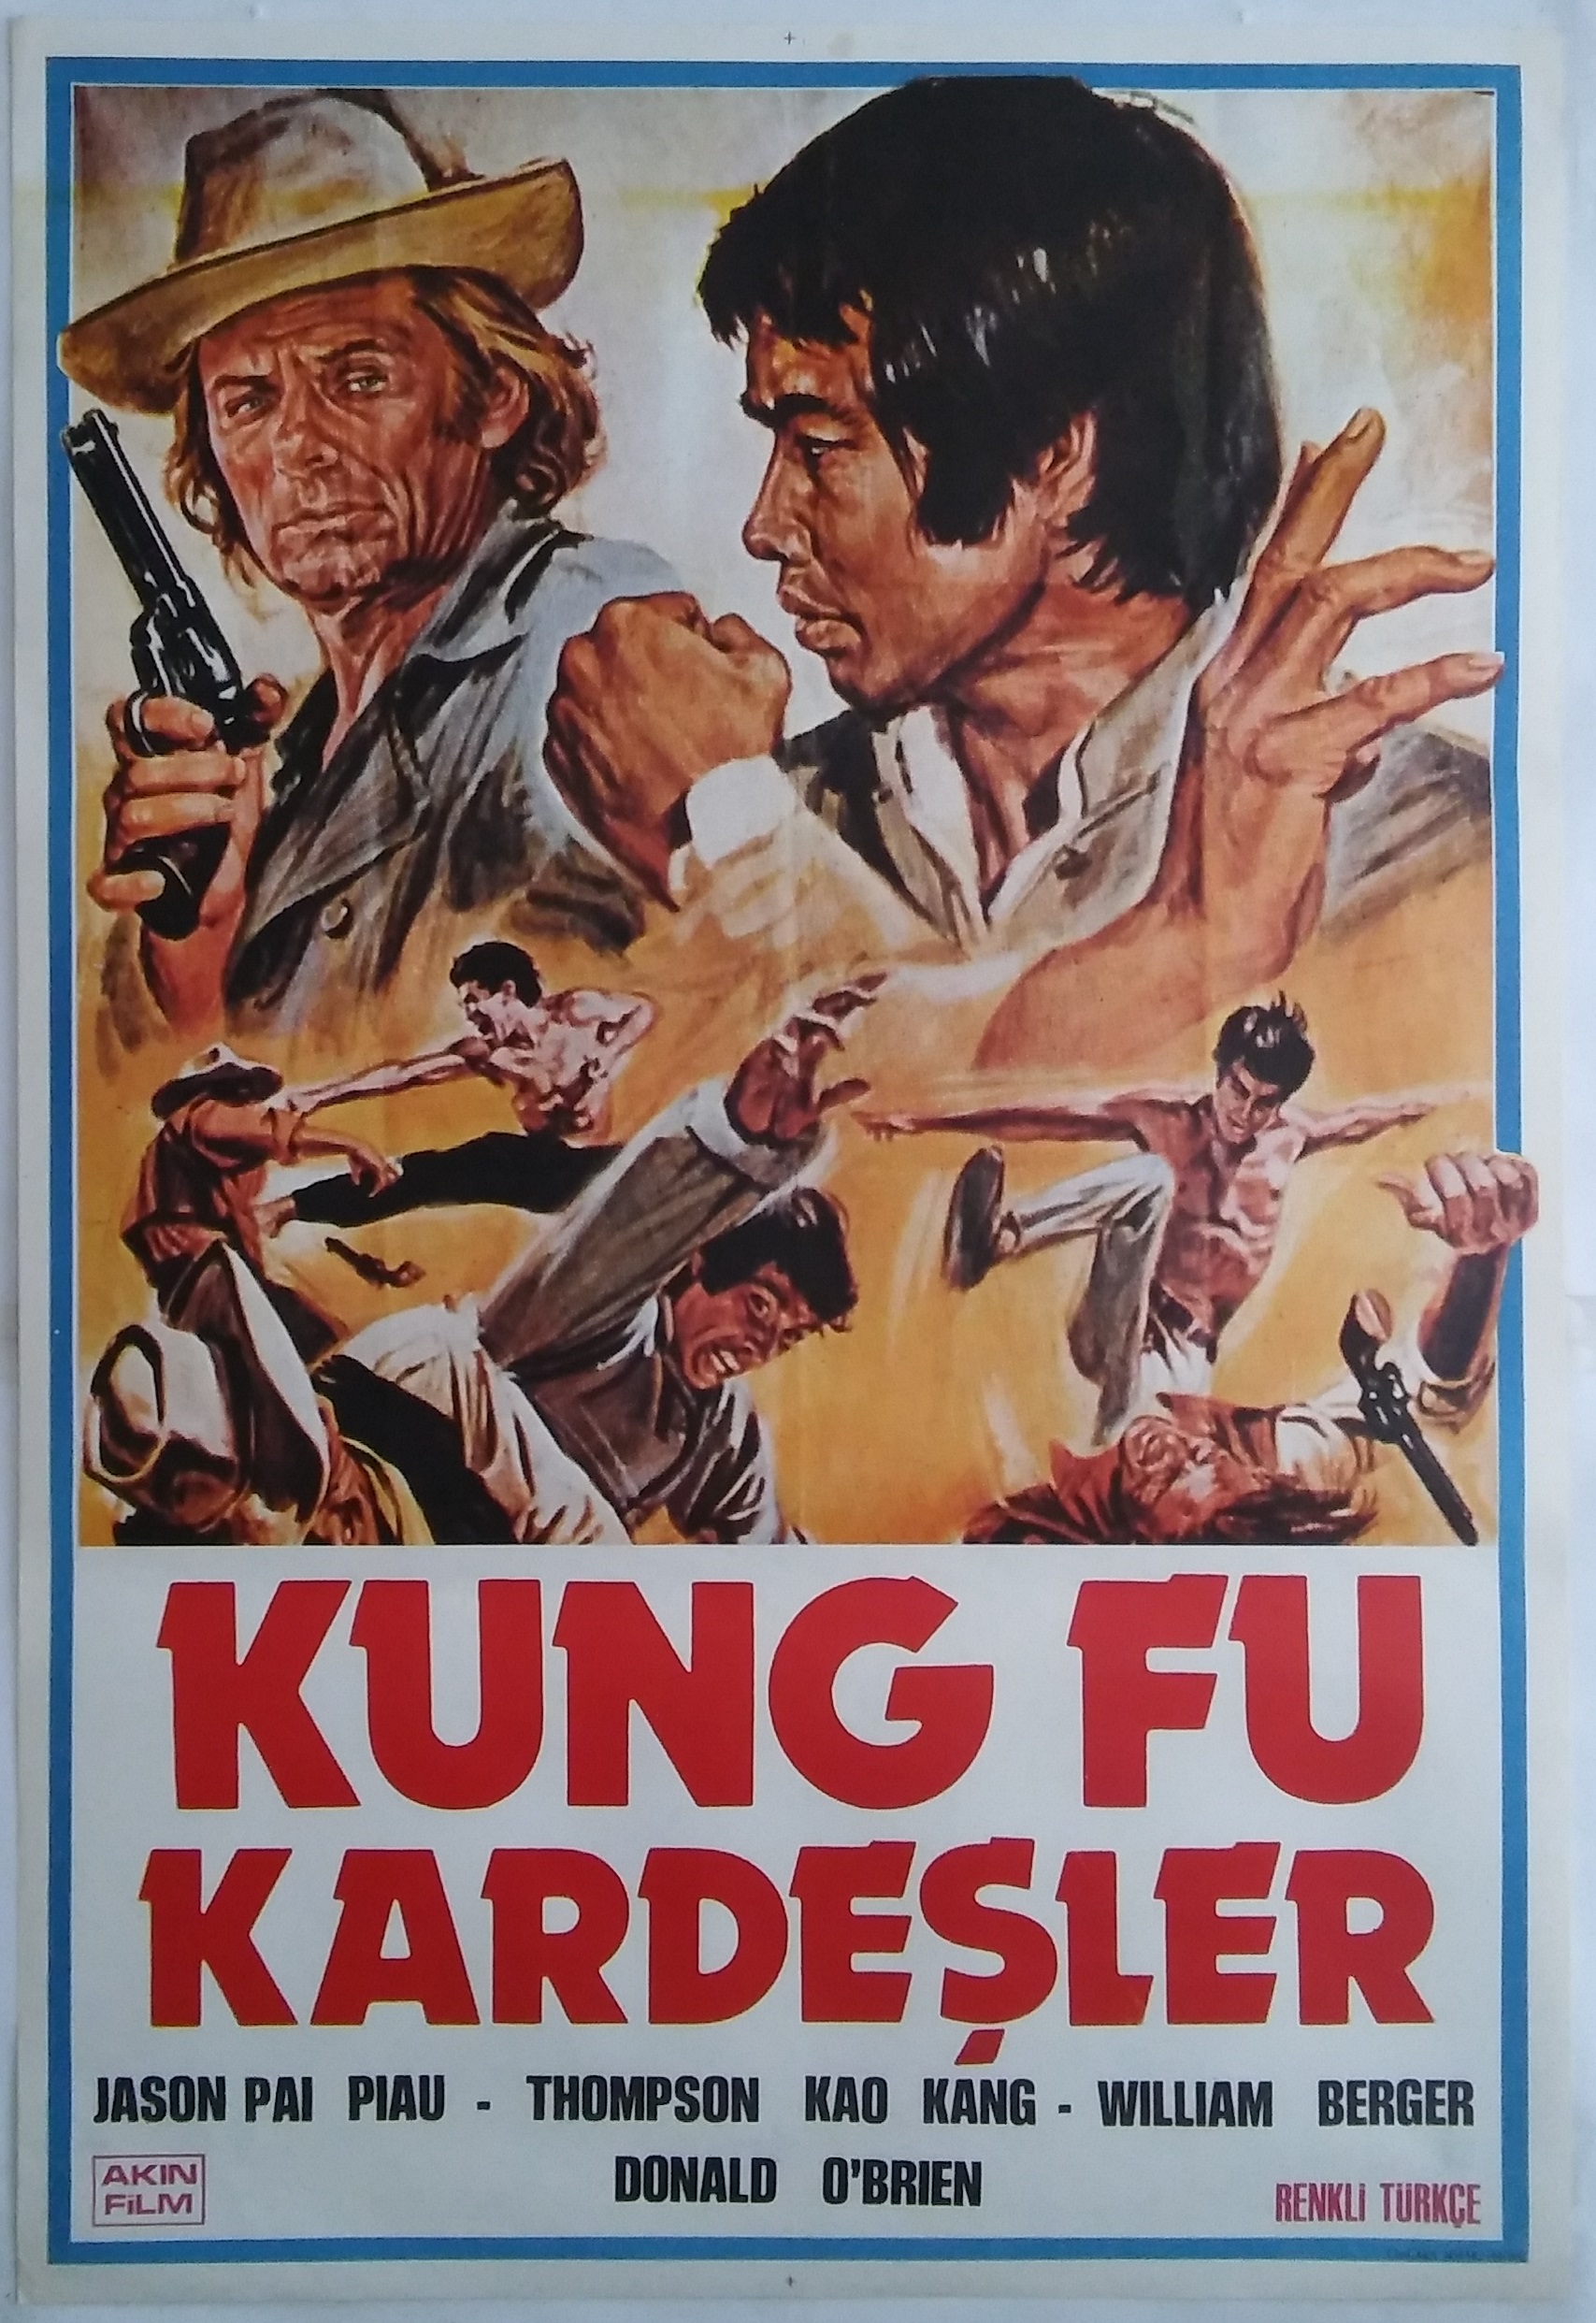 Kung Fu Brothers in the Wild West (1973) Screenshot 2